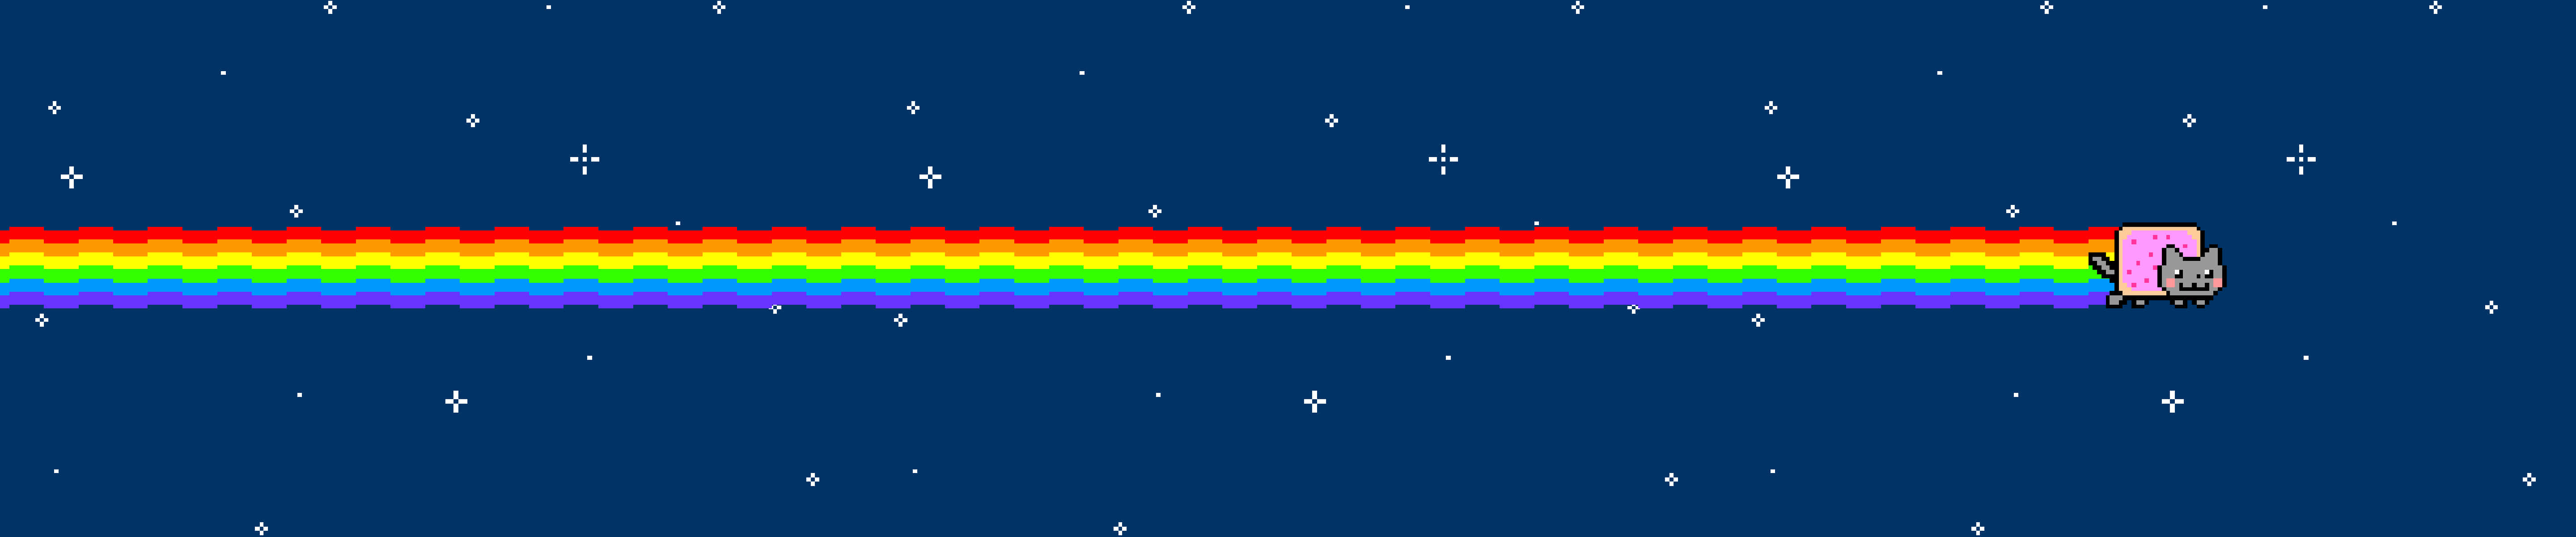 Vibrant Nyan Cat Journeying Through Space